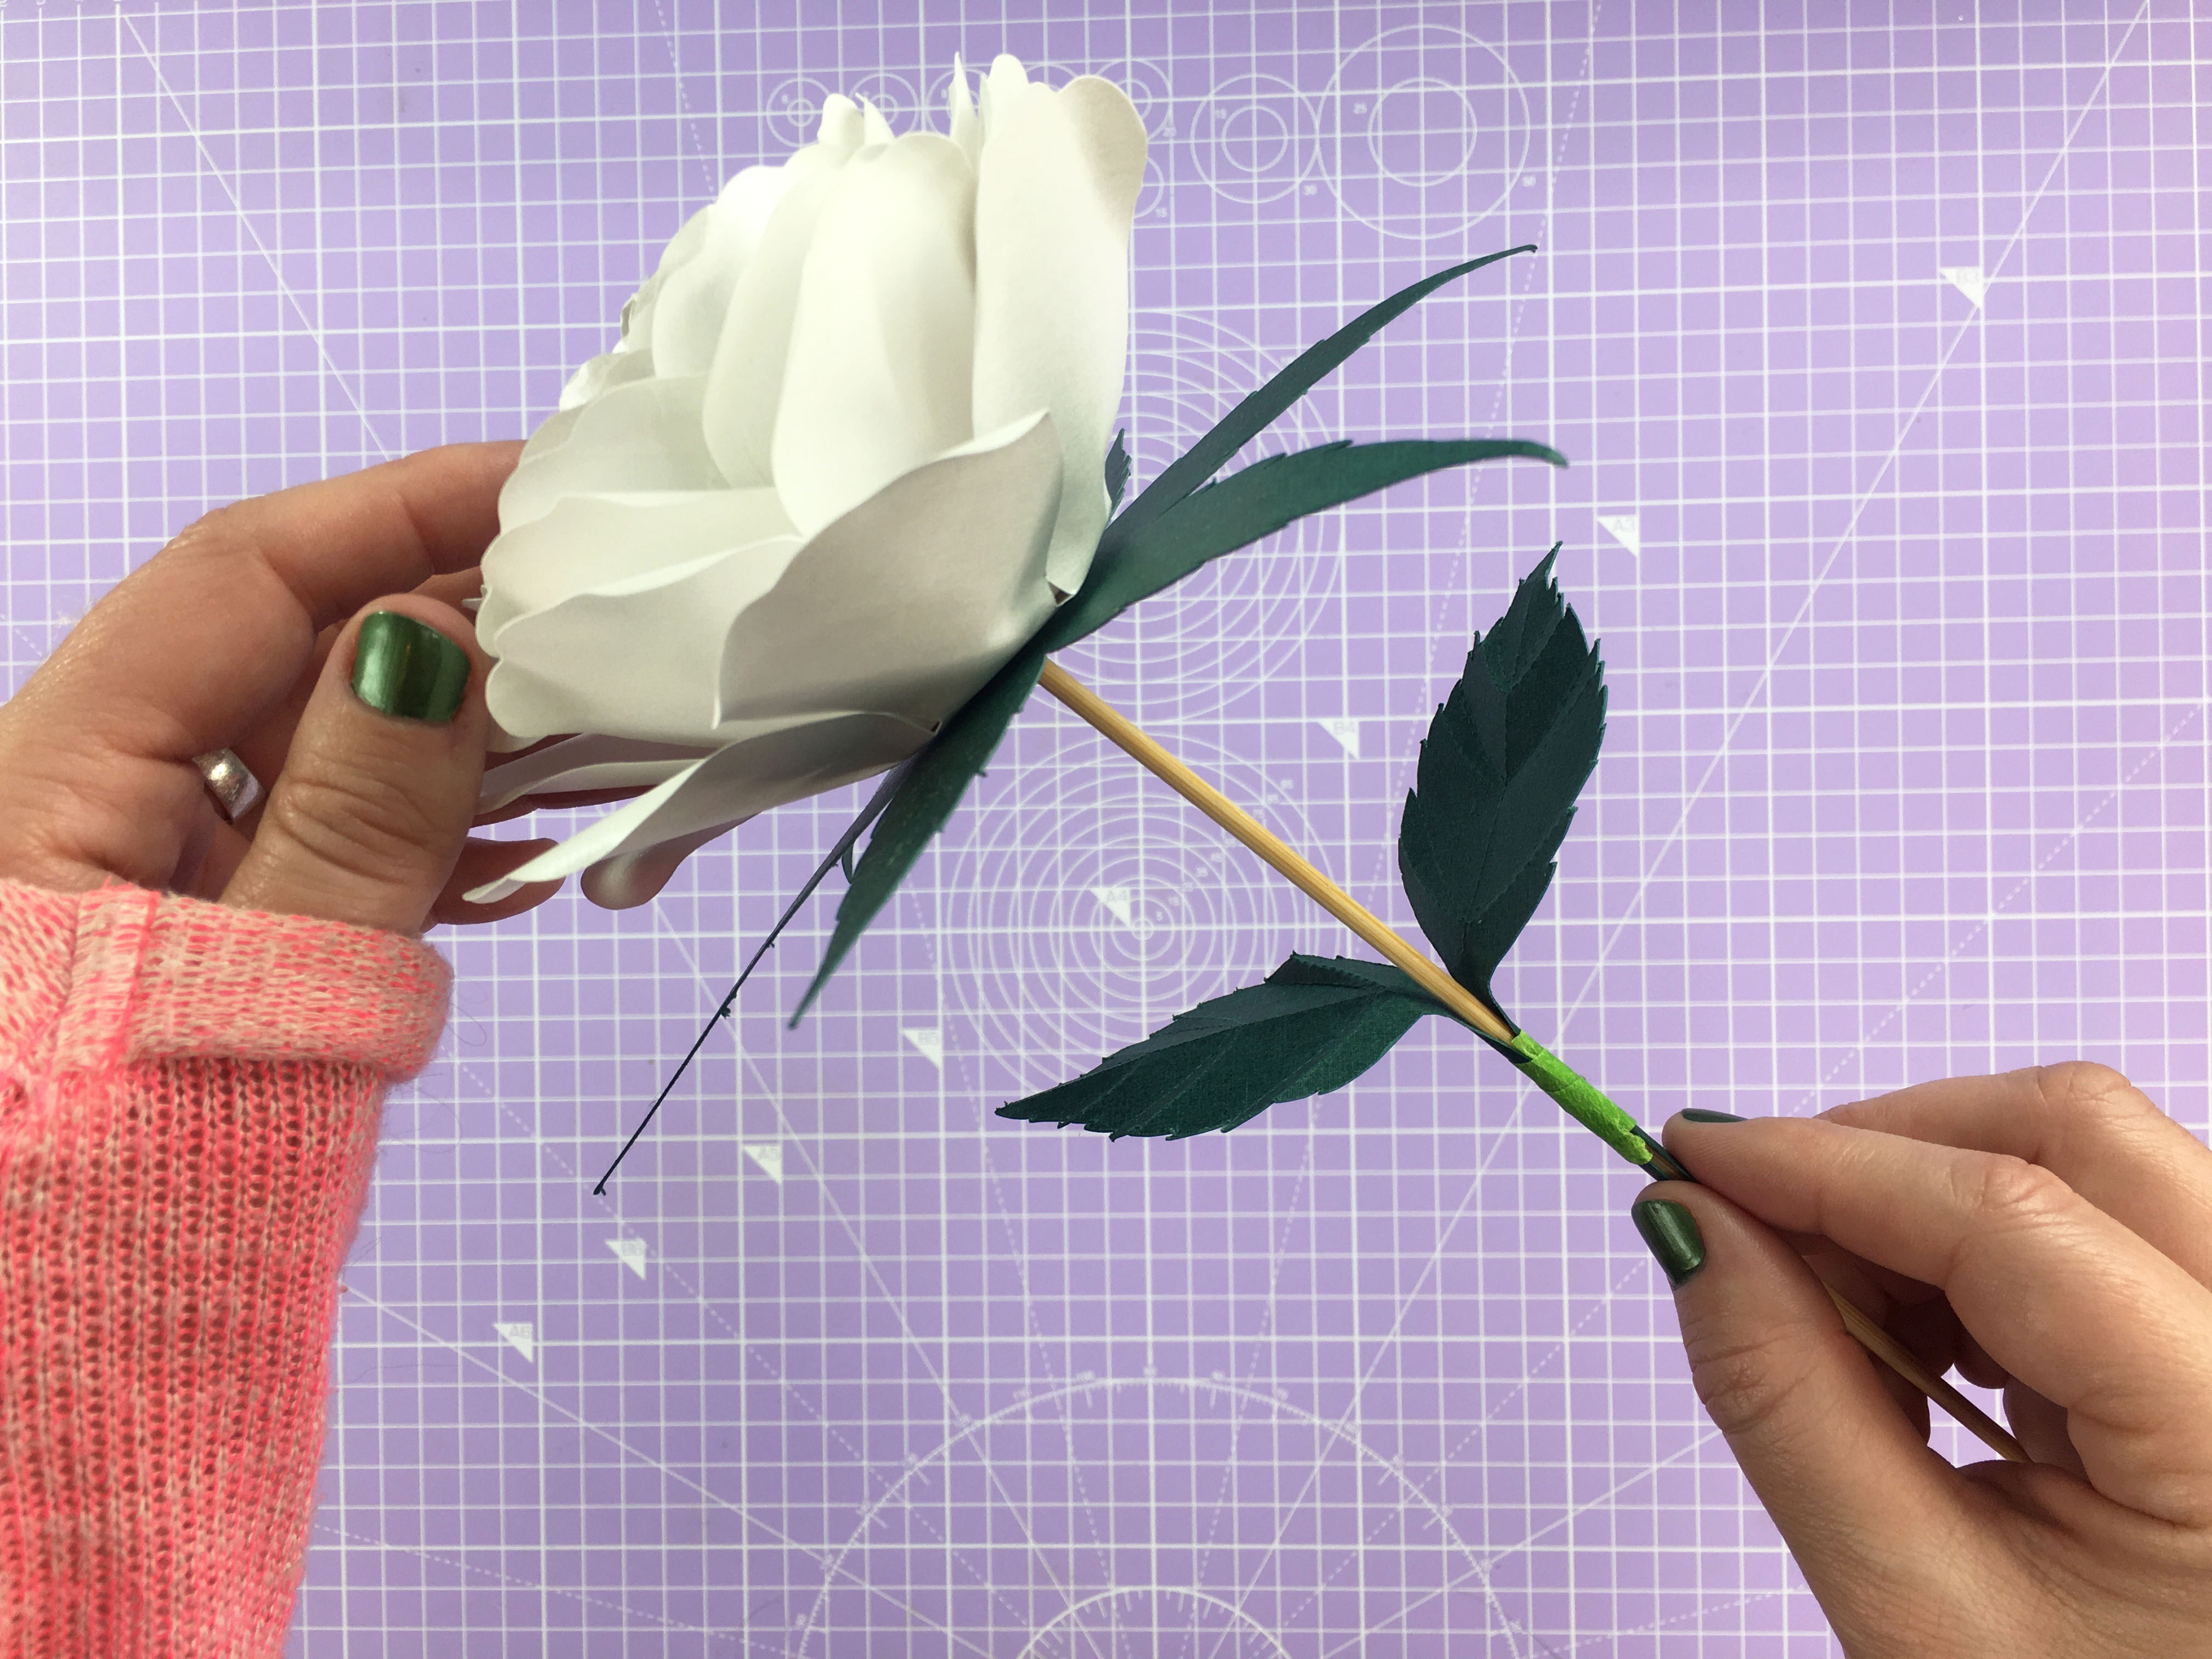 How to make a paper rose - Gathered